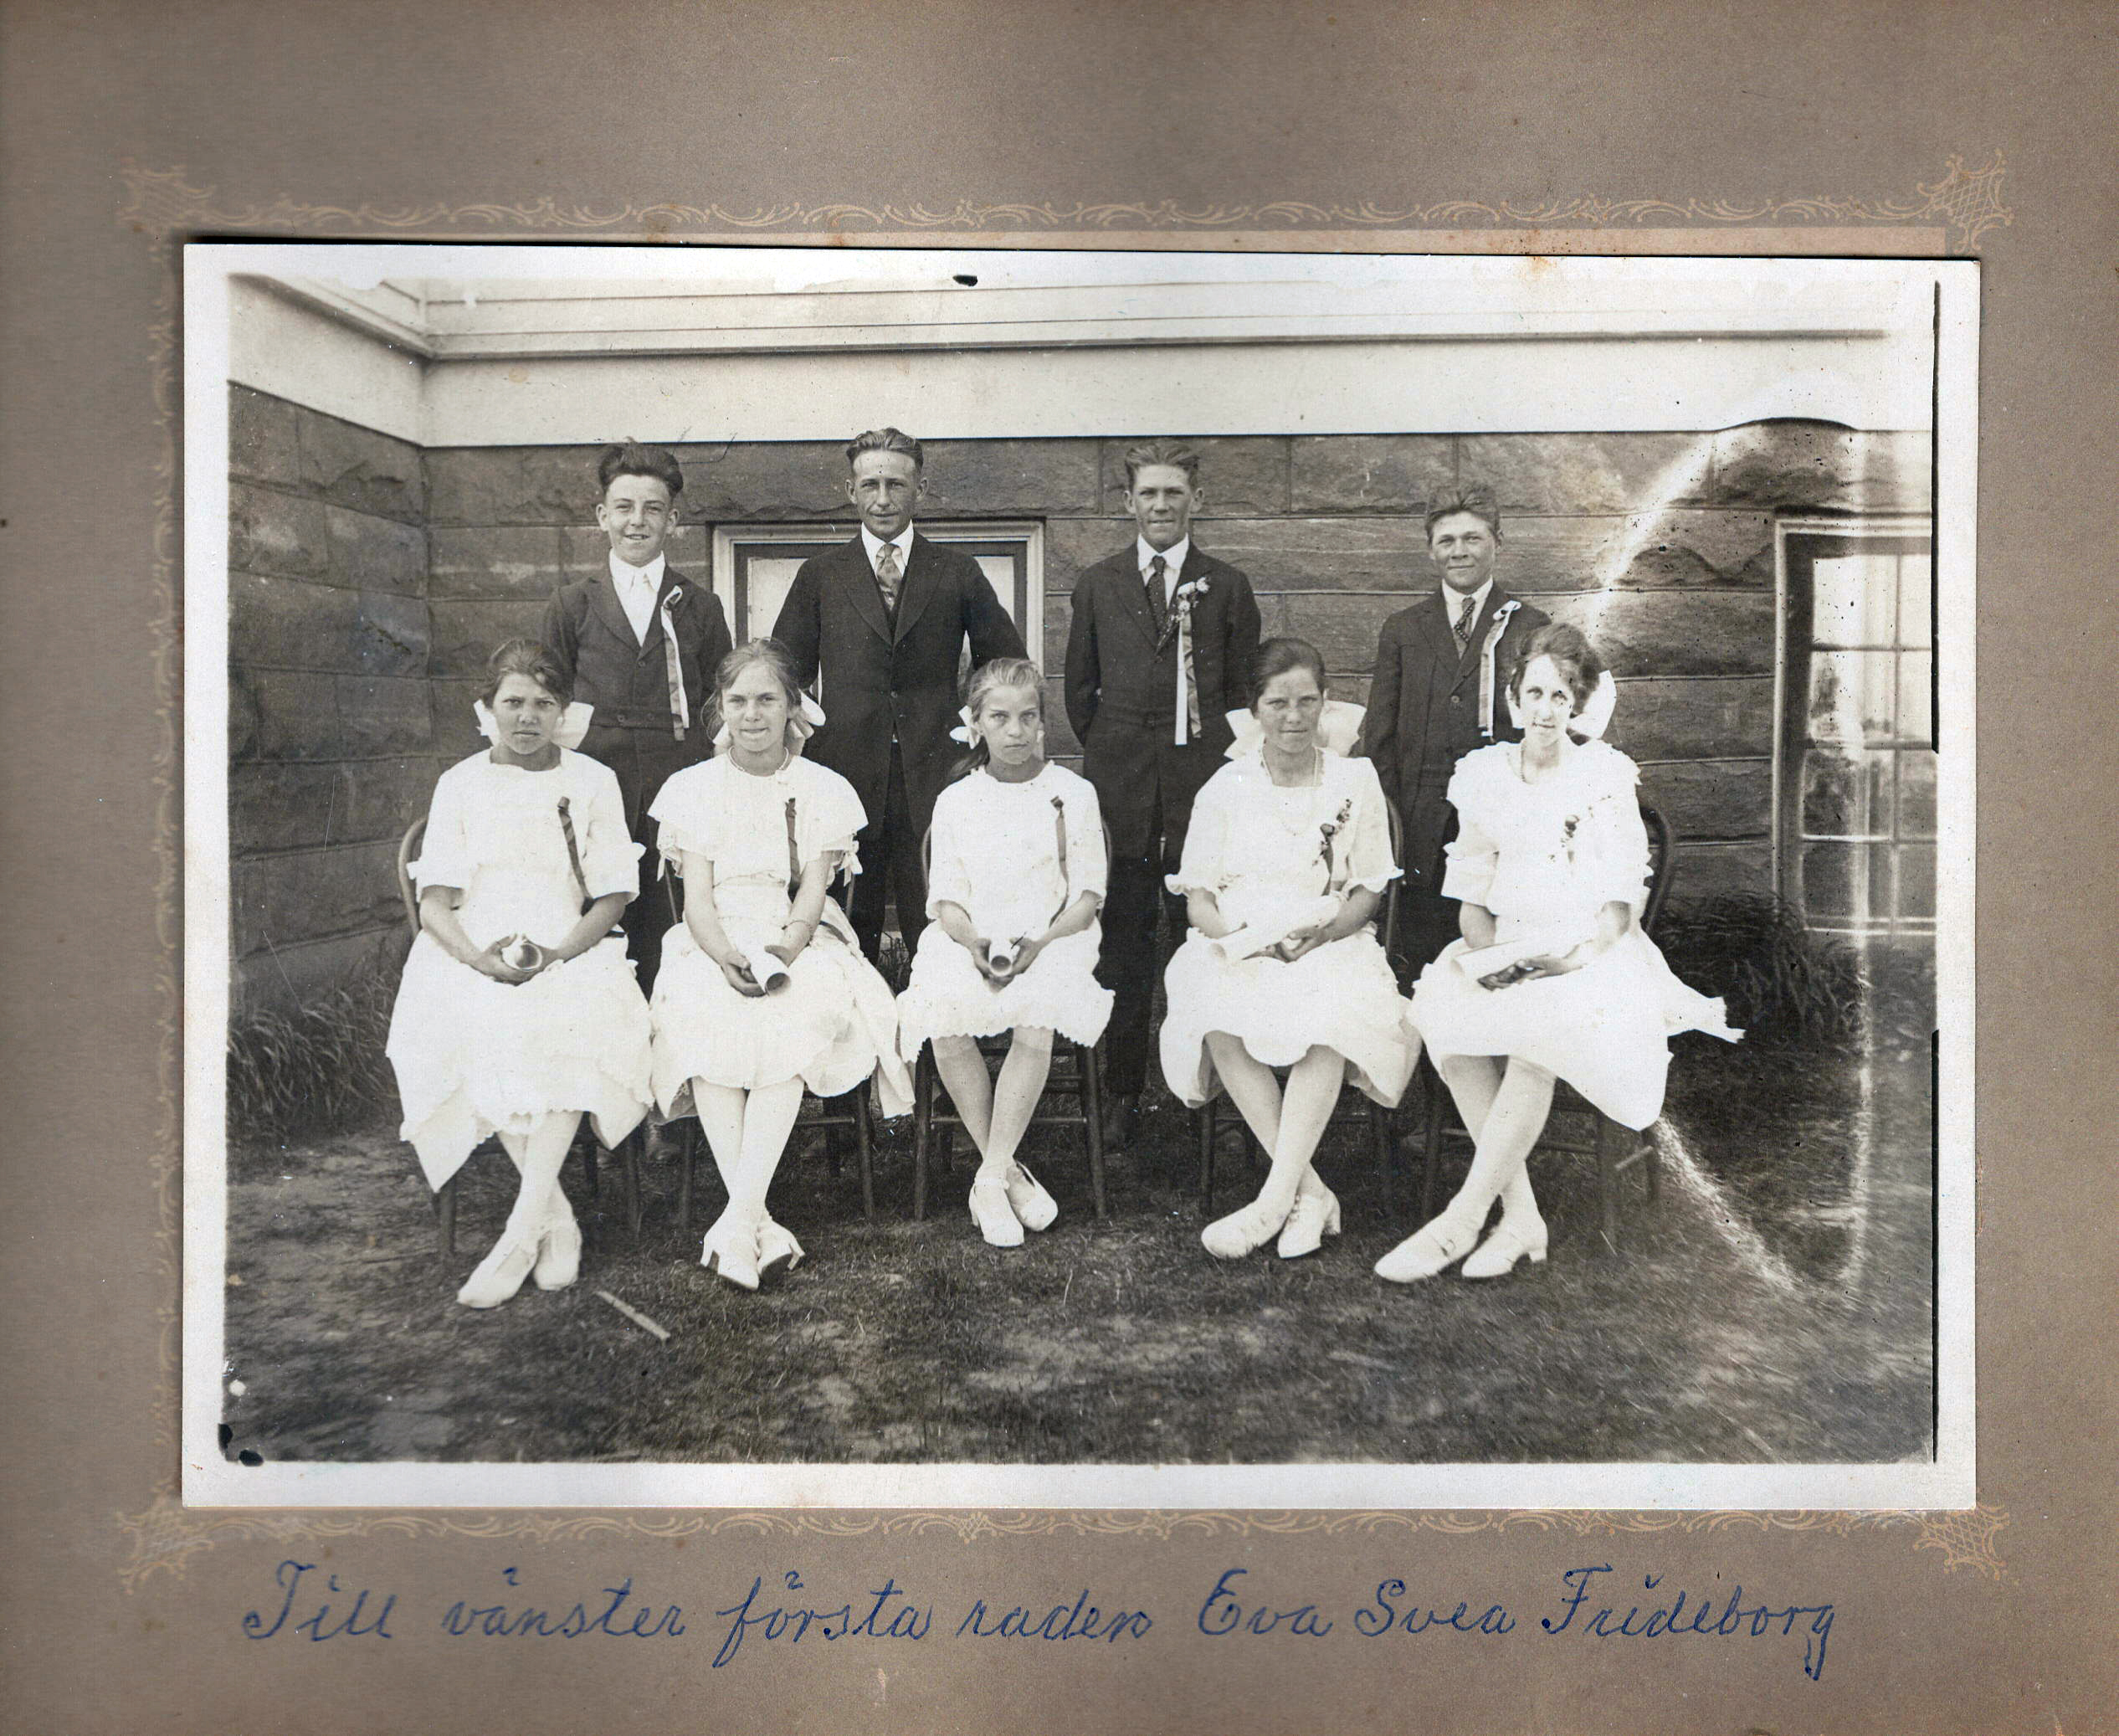 The girls are seated, and the boys and the teacher are standing behind them
        in front of the outside of the school. The photo is contained in a 
        cardboard frame.